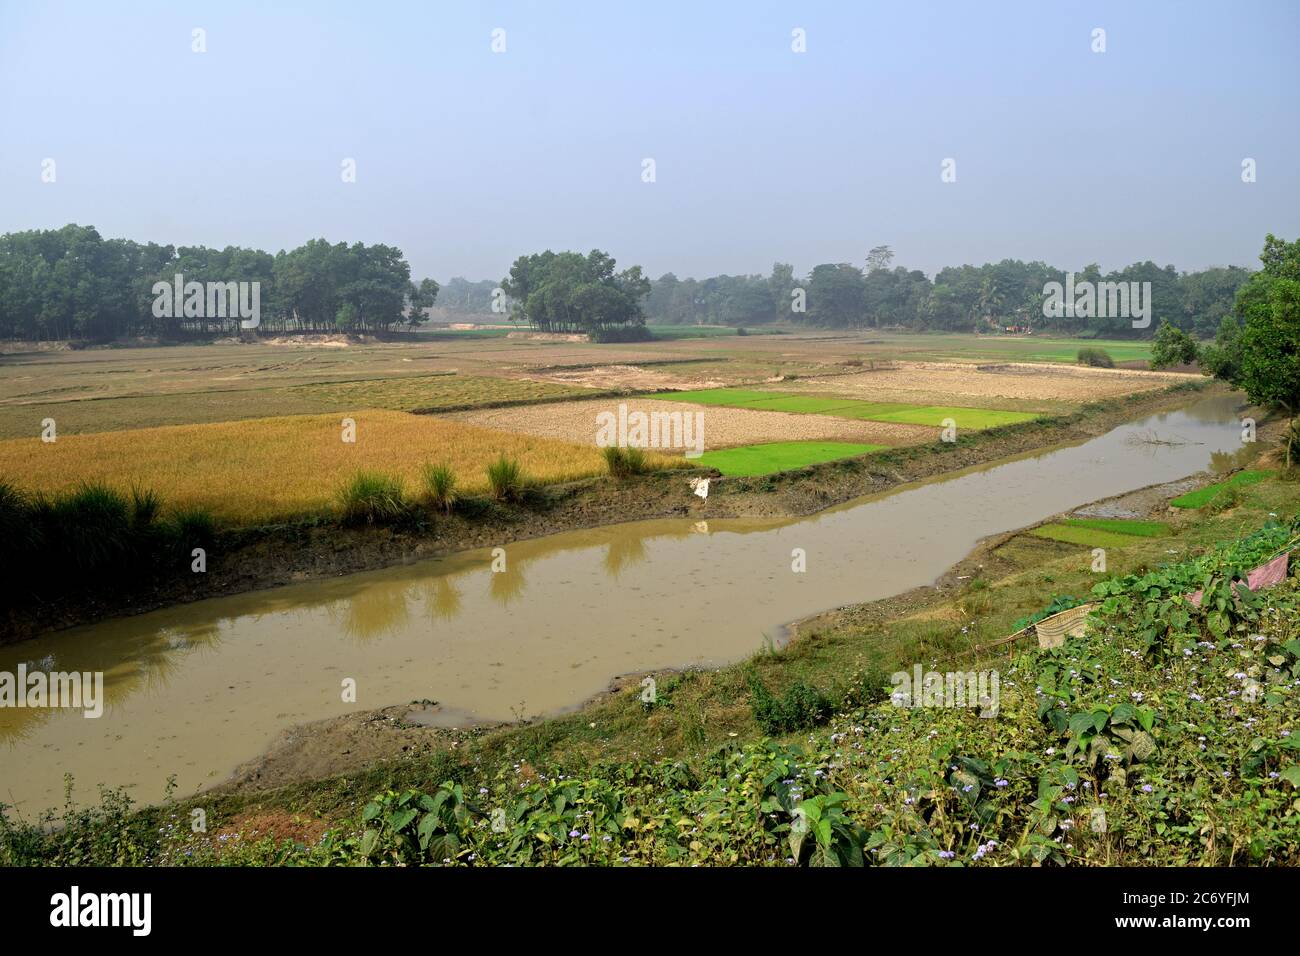 A small canal in village nature Stock Photo